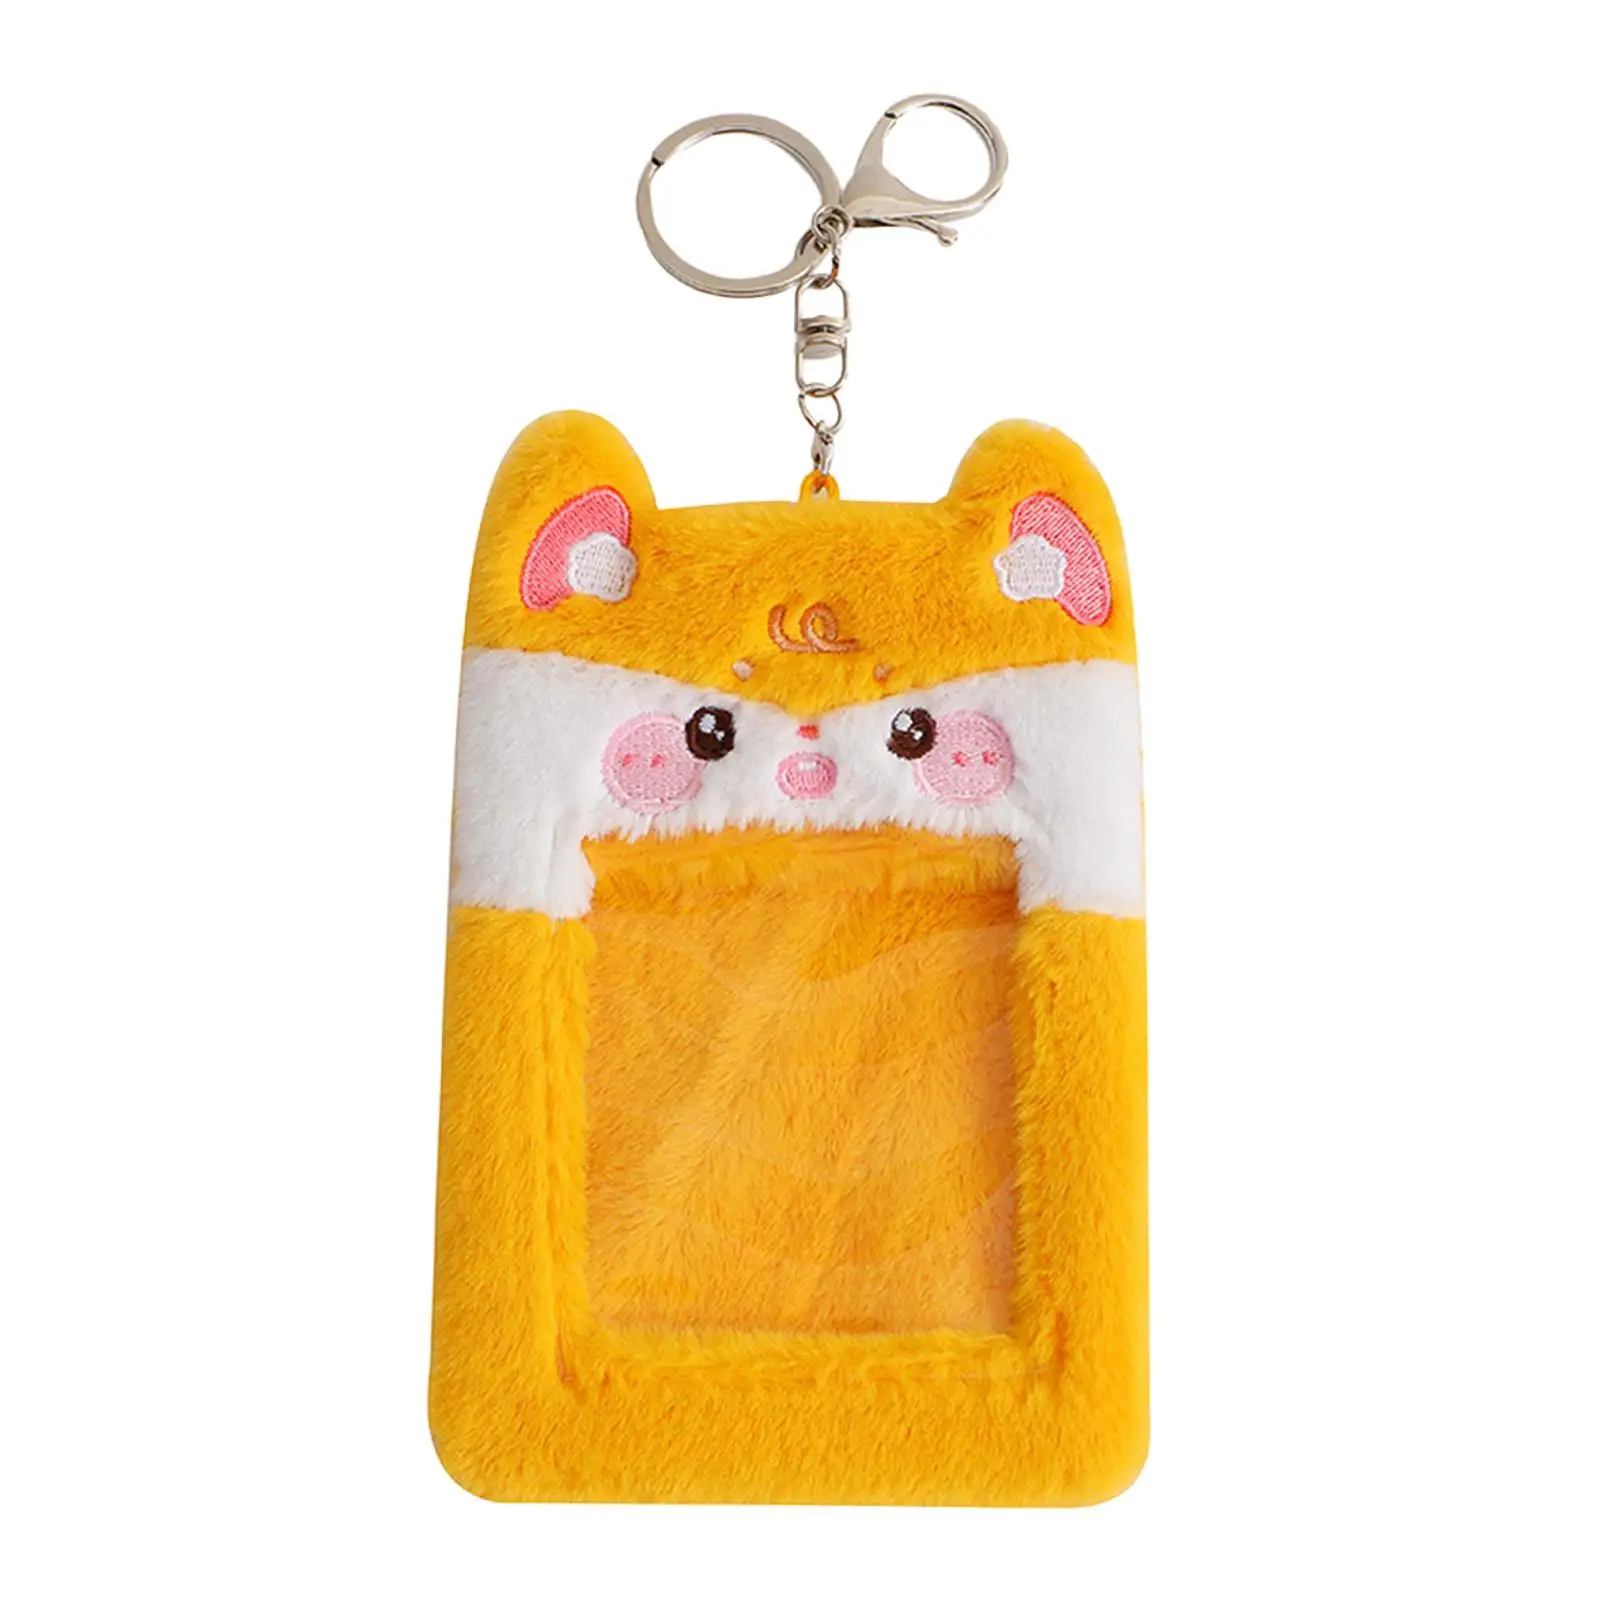 Cute Plush Photocard Holder ID Card Cover Bag Idol Photo Storage Card for Birthday Gift Outside Football Cards